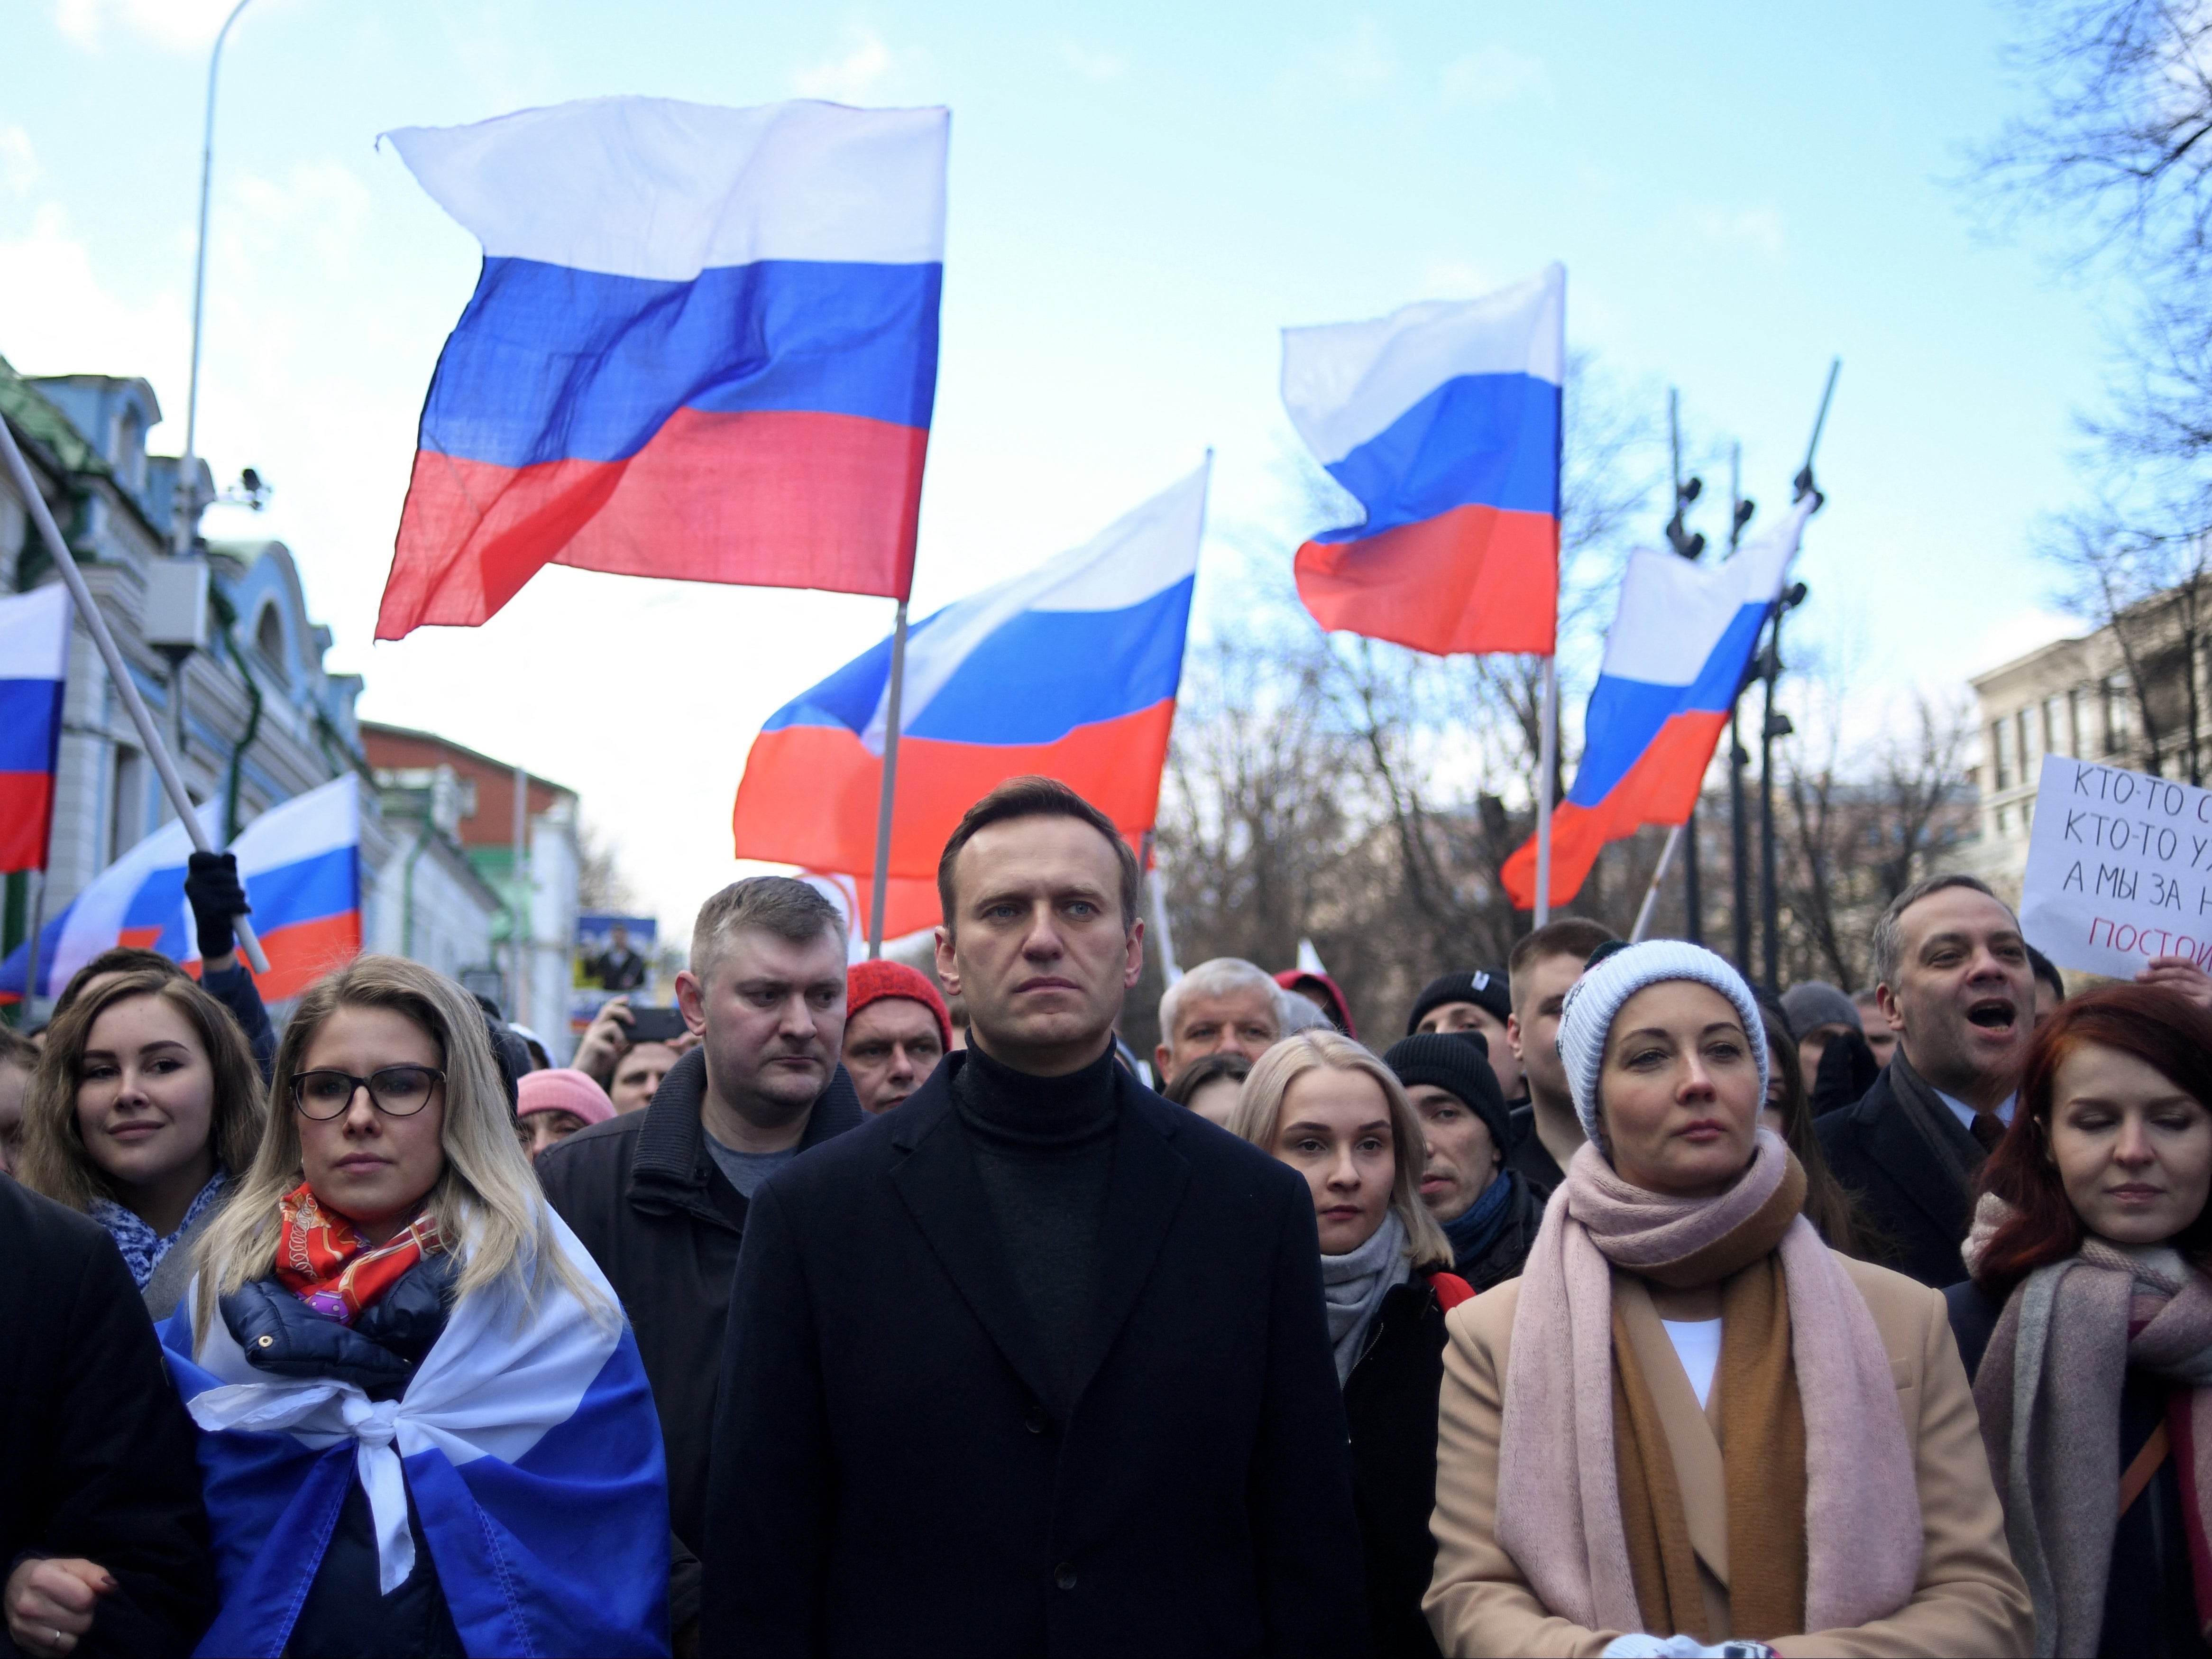 Russian opposition leader Alexei Navalny and his wife Yulia march in memory of murdered Kremlin critic Boris Nemtsov in Moscow in February 2020